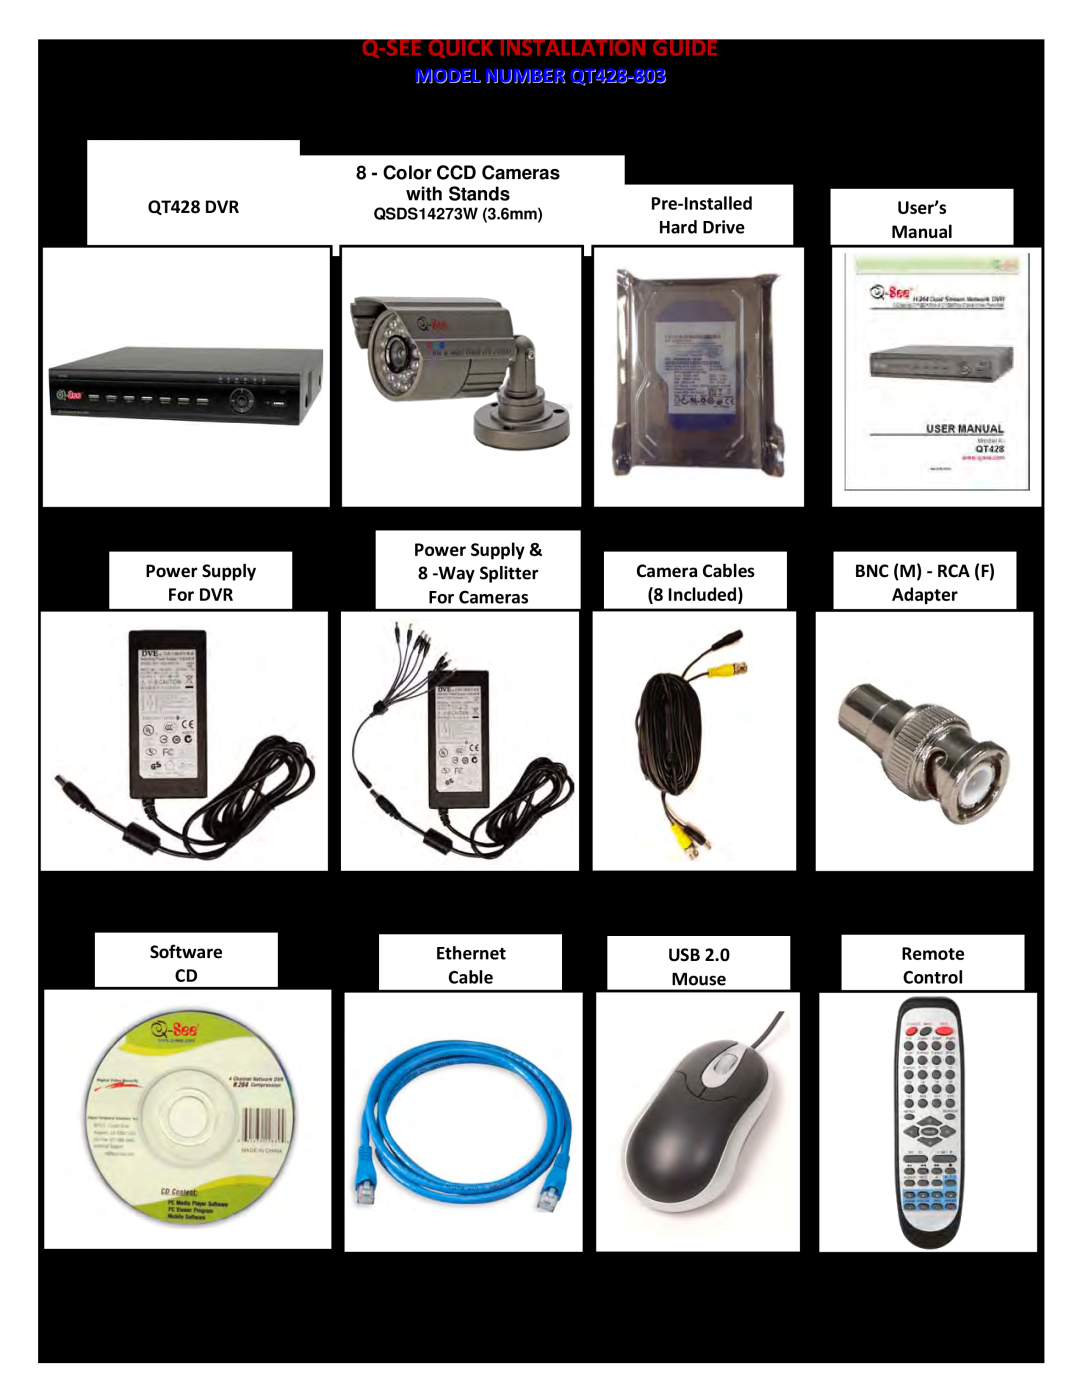 Q-See Q-Seequick Installation Guide, MODEL NUMBER QT428-803, PART 1 - PACKAGE CONTENTS, P a g e, QT428 DVR, Hard Drive 